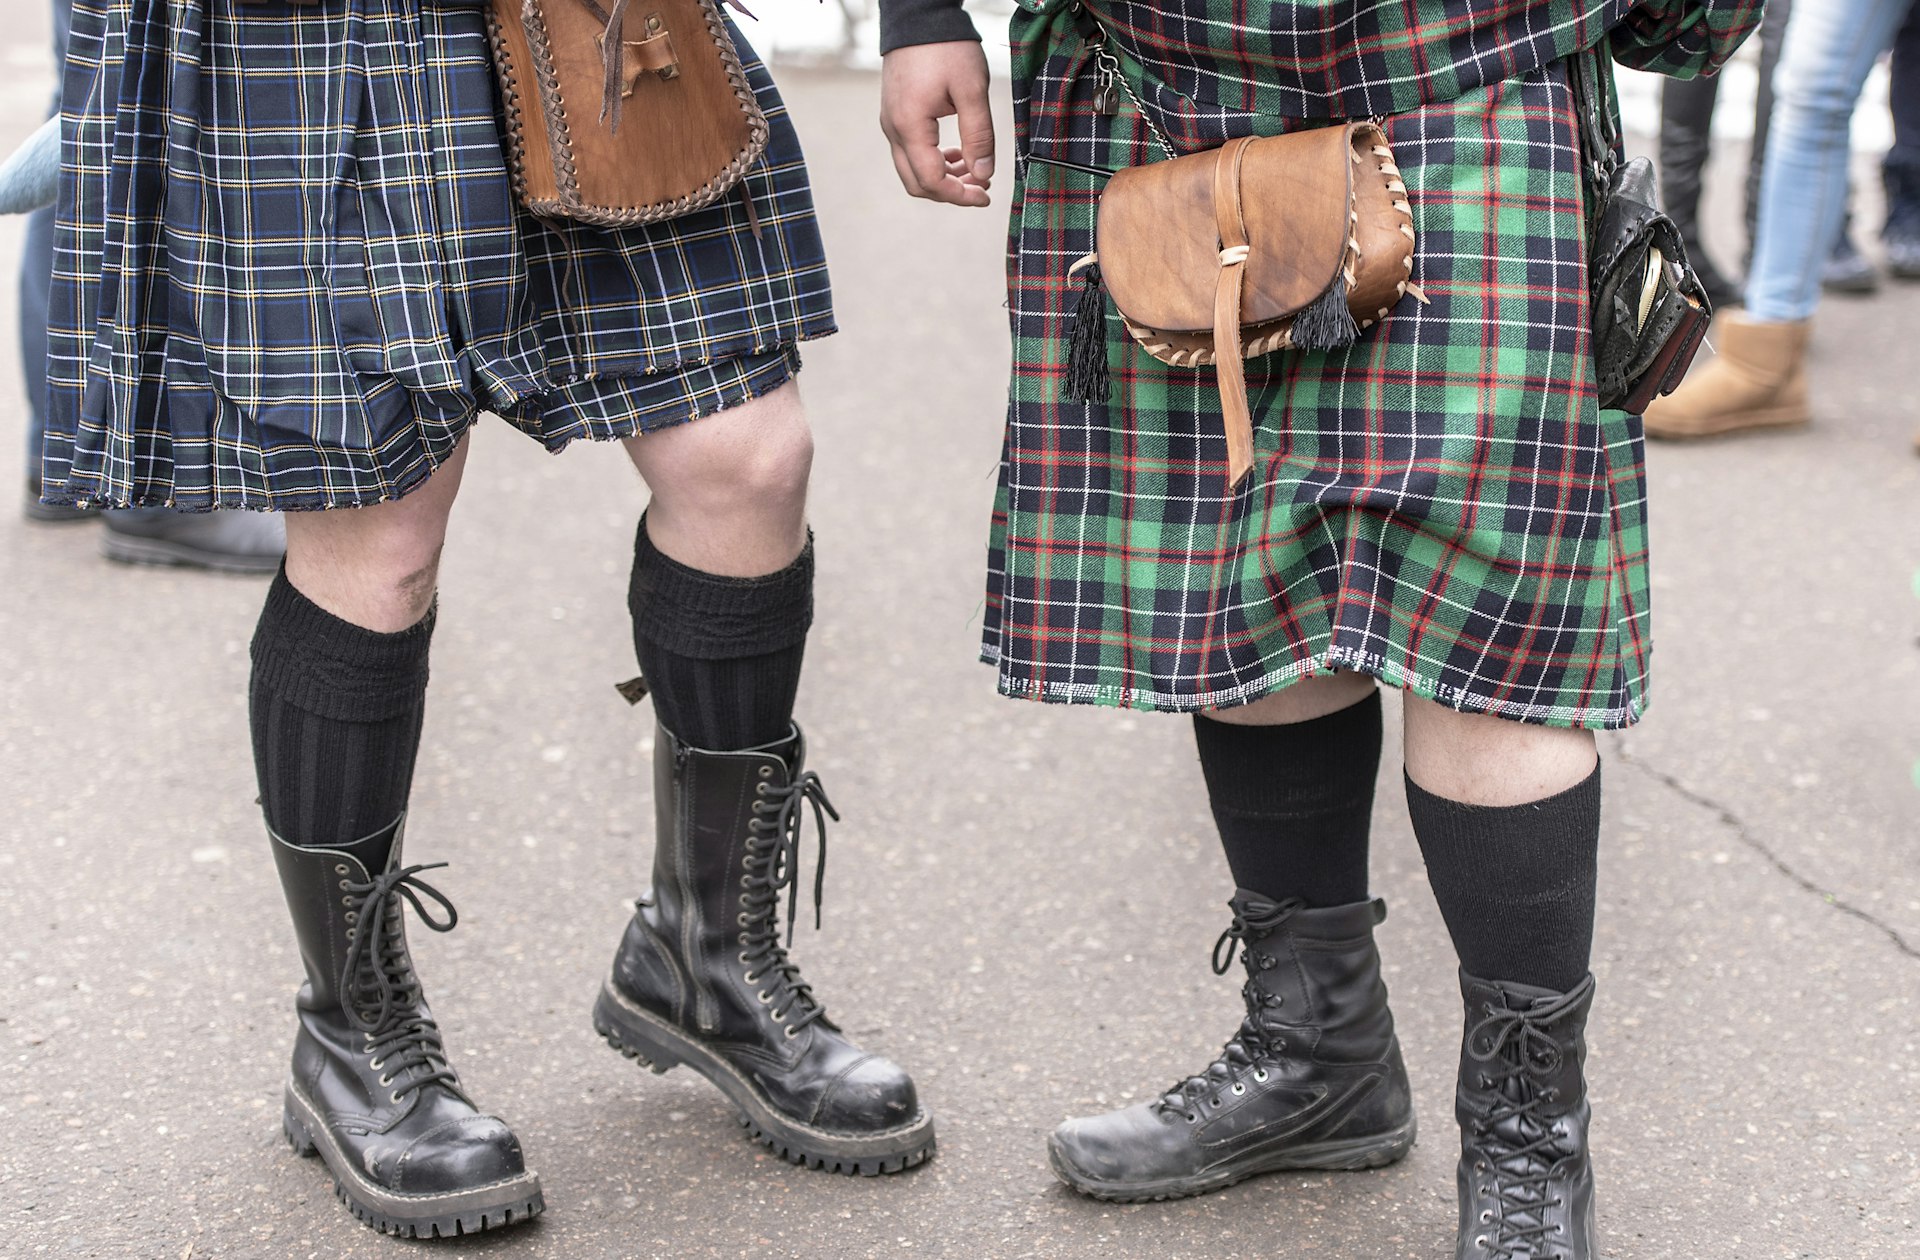 Two bagpipers wearing traditional Scottish kilts